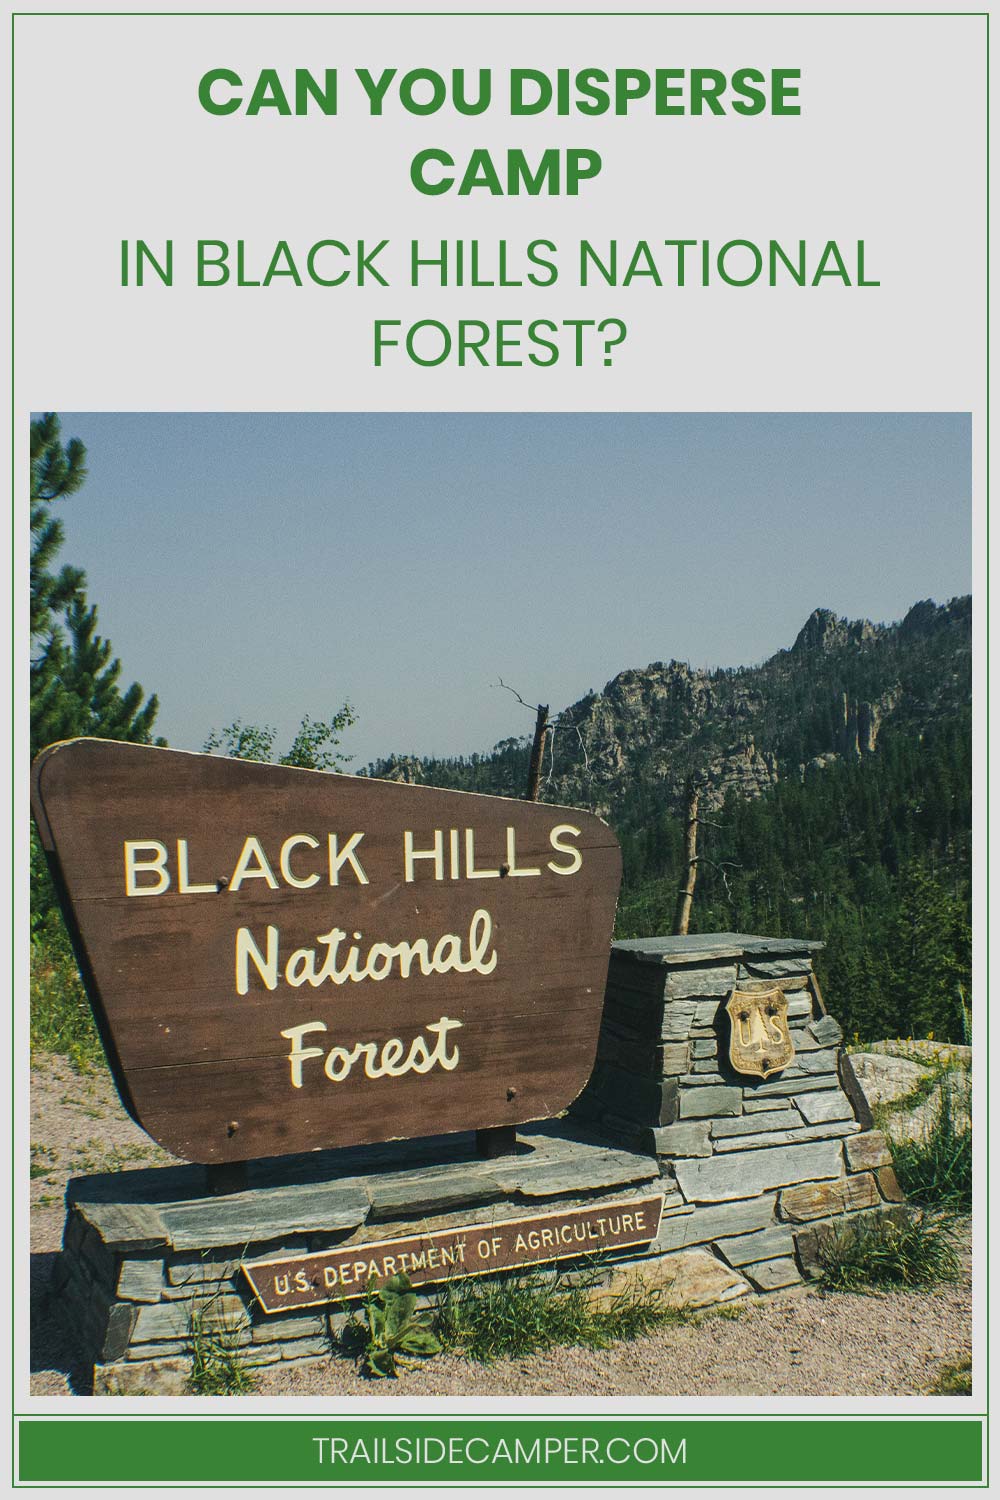 Can you disperse camp in Black Hills National Forest?